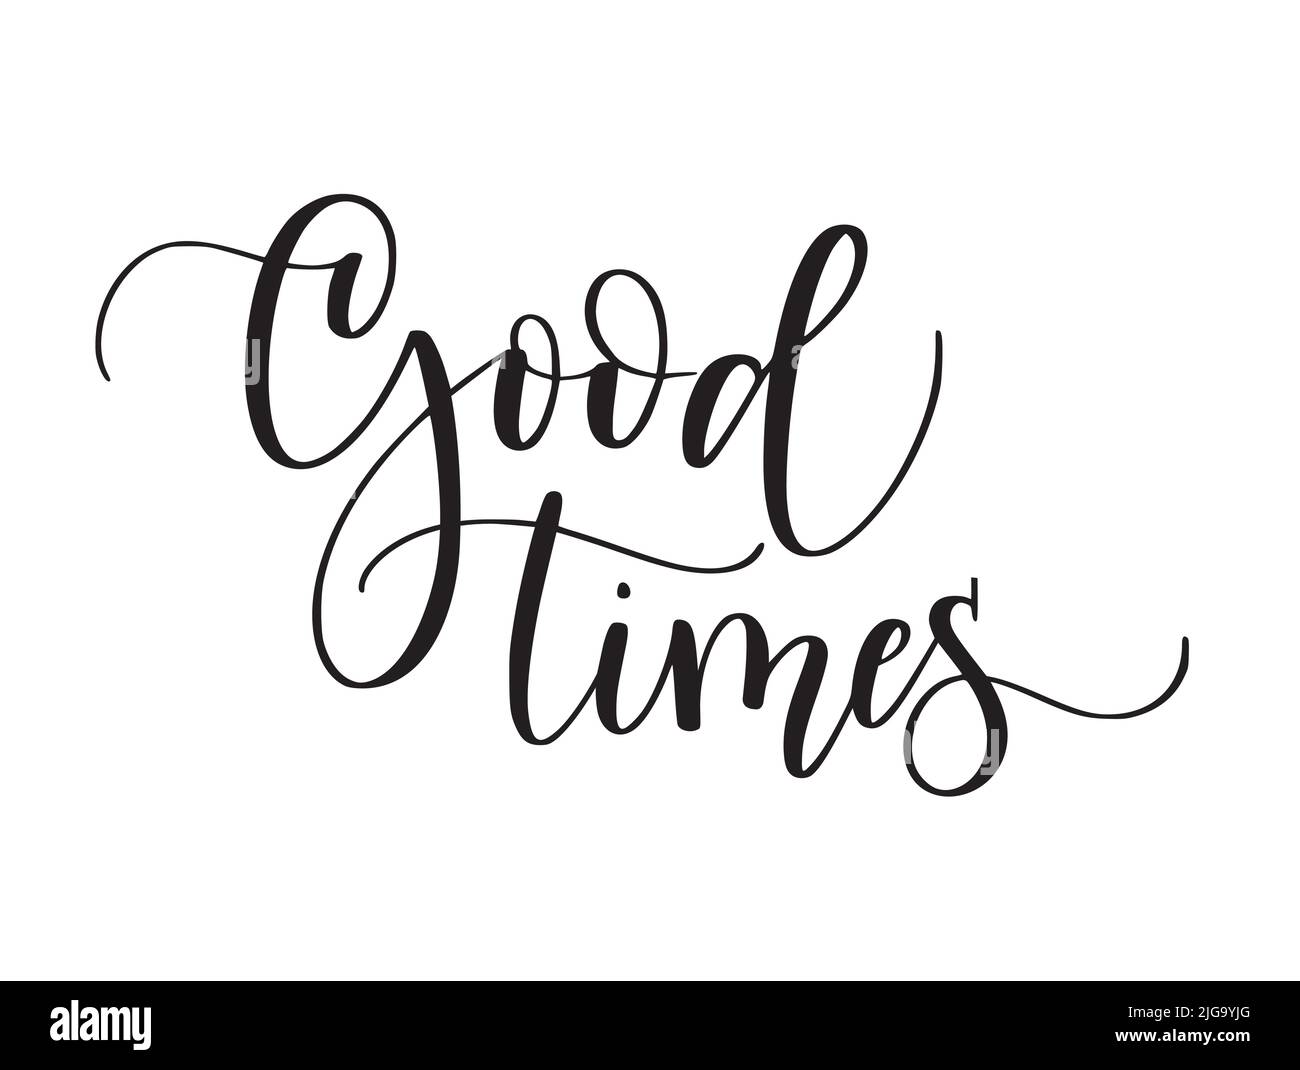 Good times cute modern calligraphy word Stock Vector